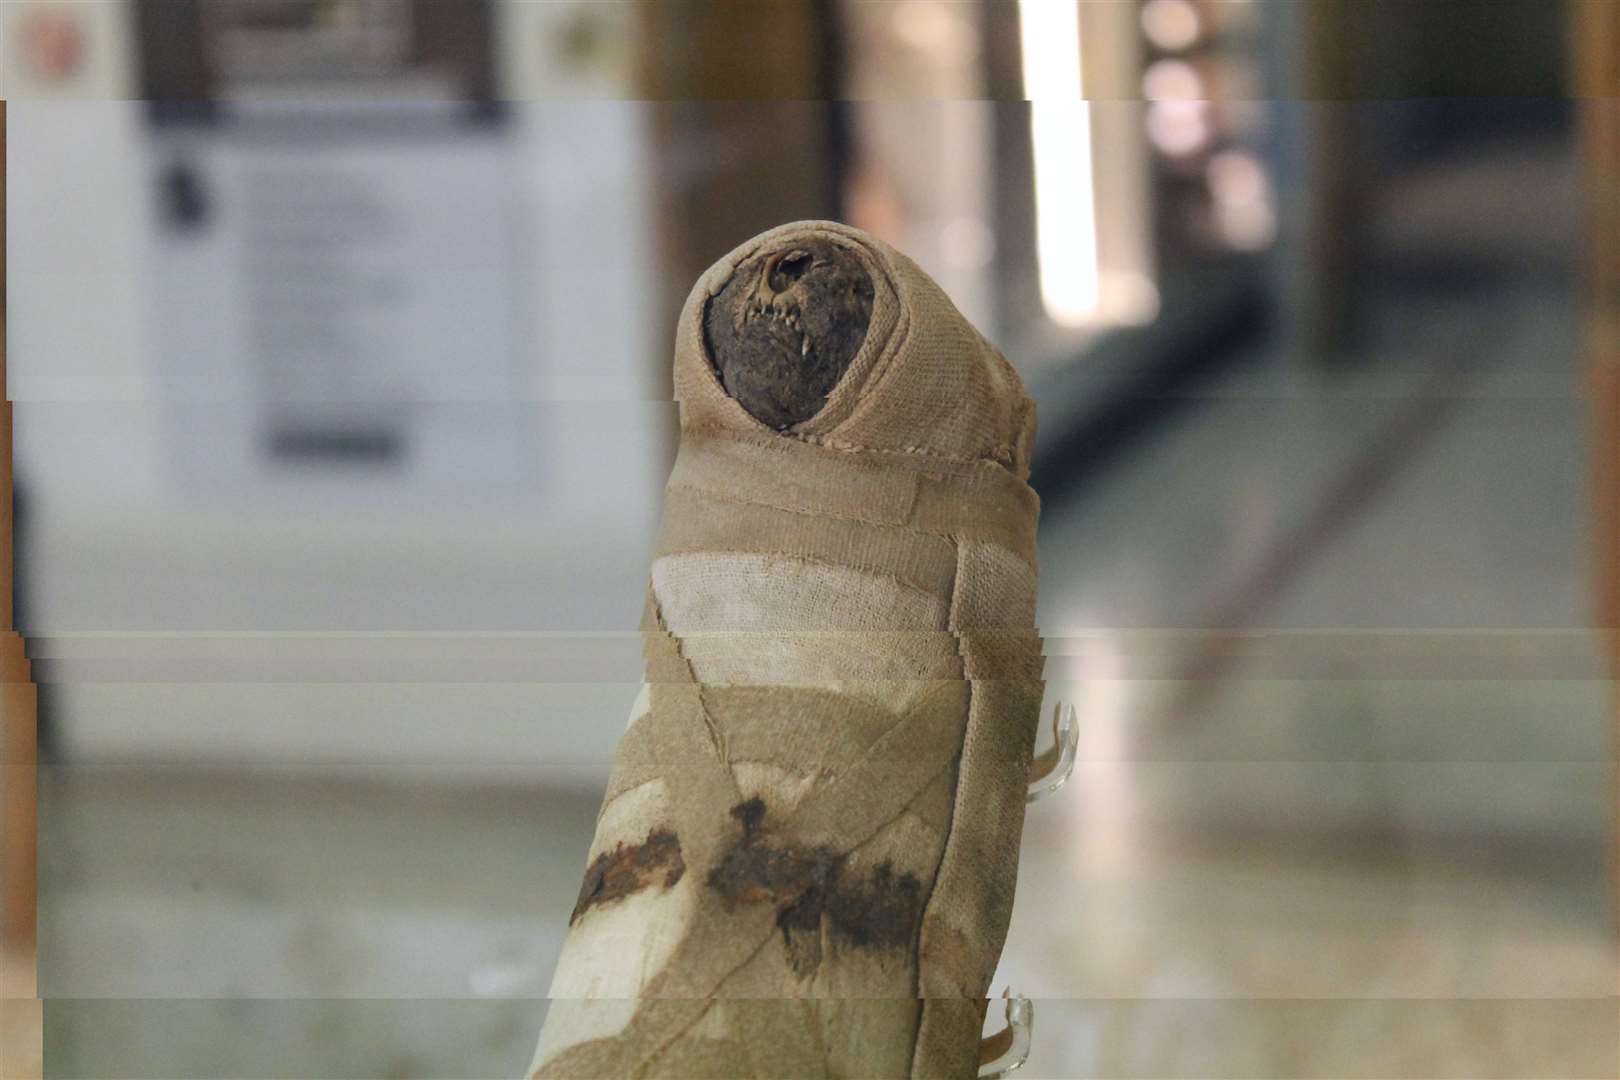 Explore the Beaney in Canterbury while its doors are shut and see the mummified cat Picture: Rob Davies